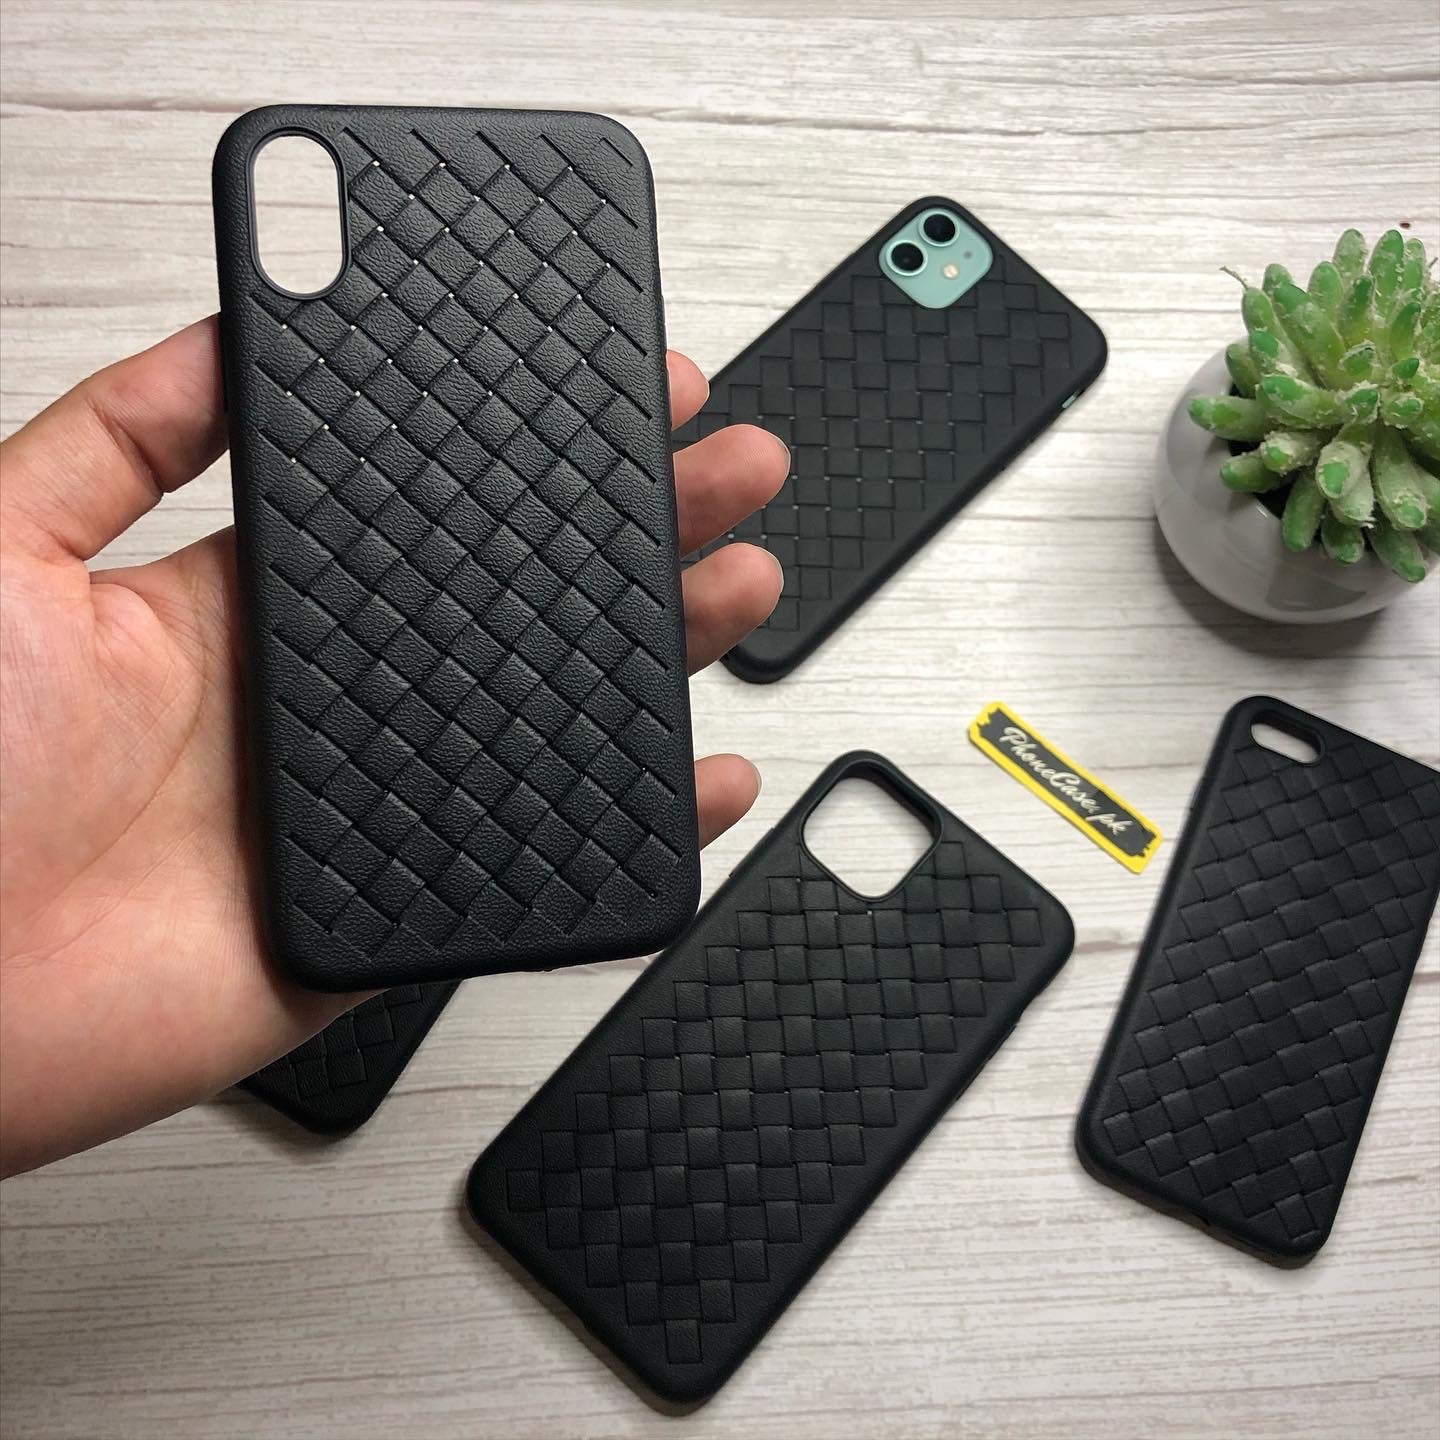 Leather Feel Mesh Shock Proof Case For All iPhone Models